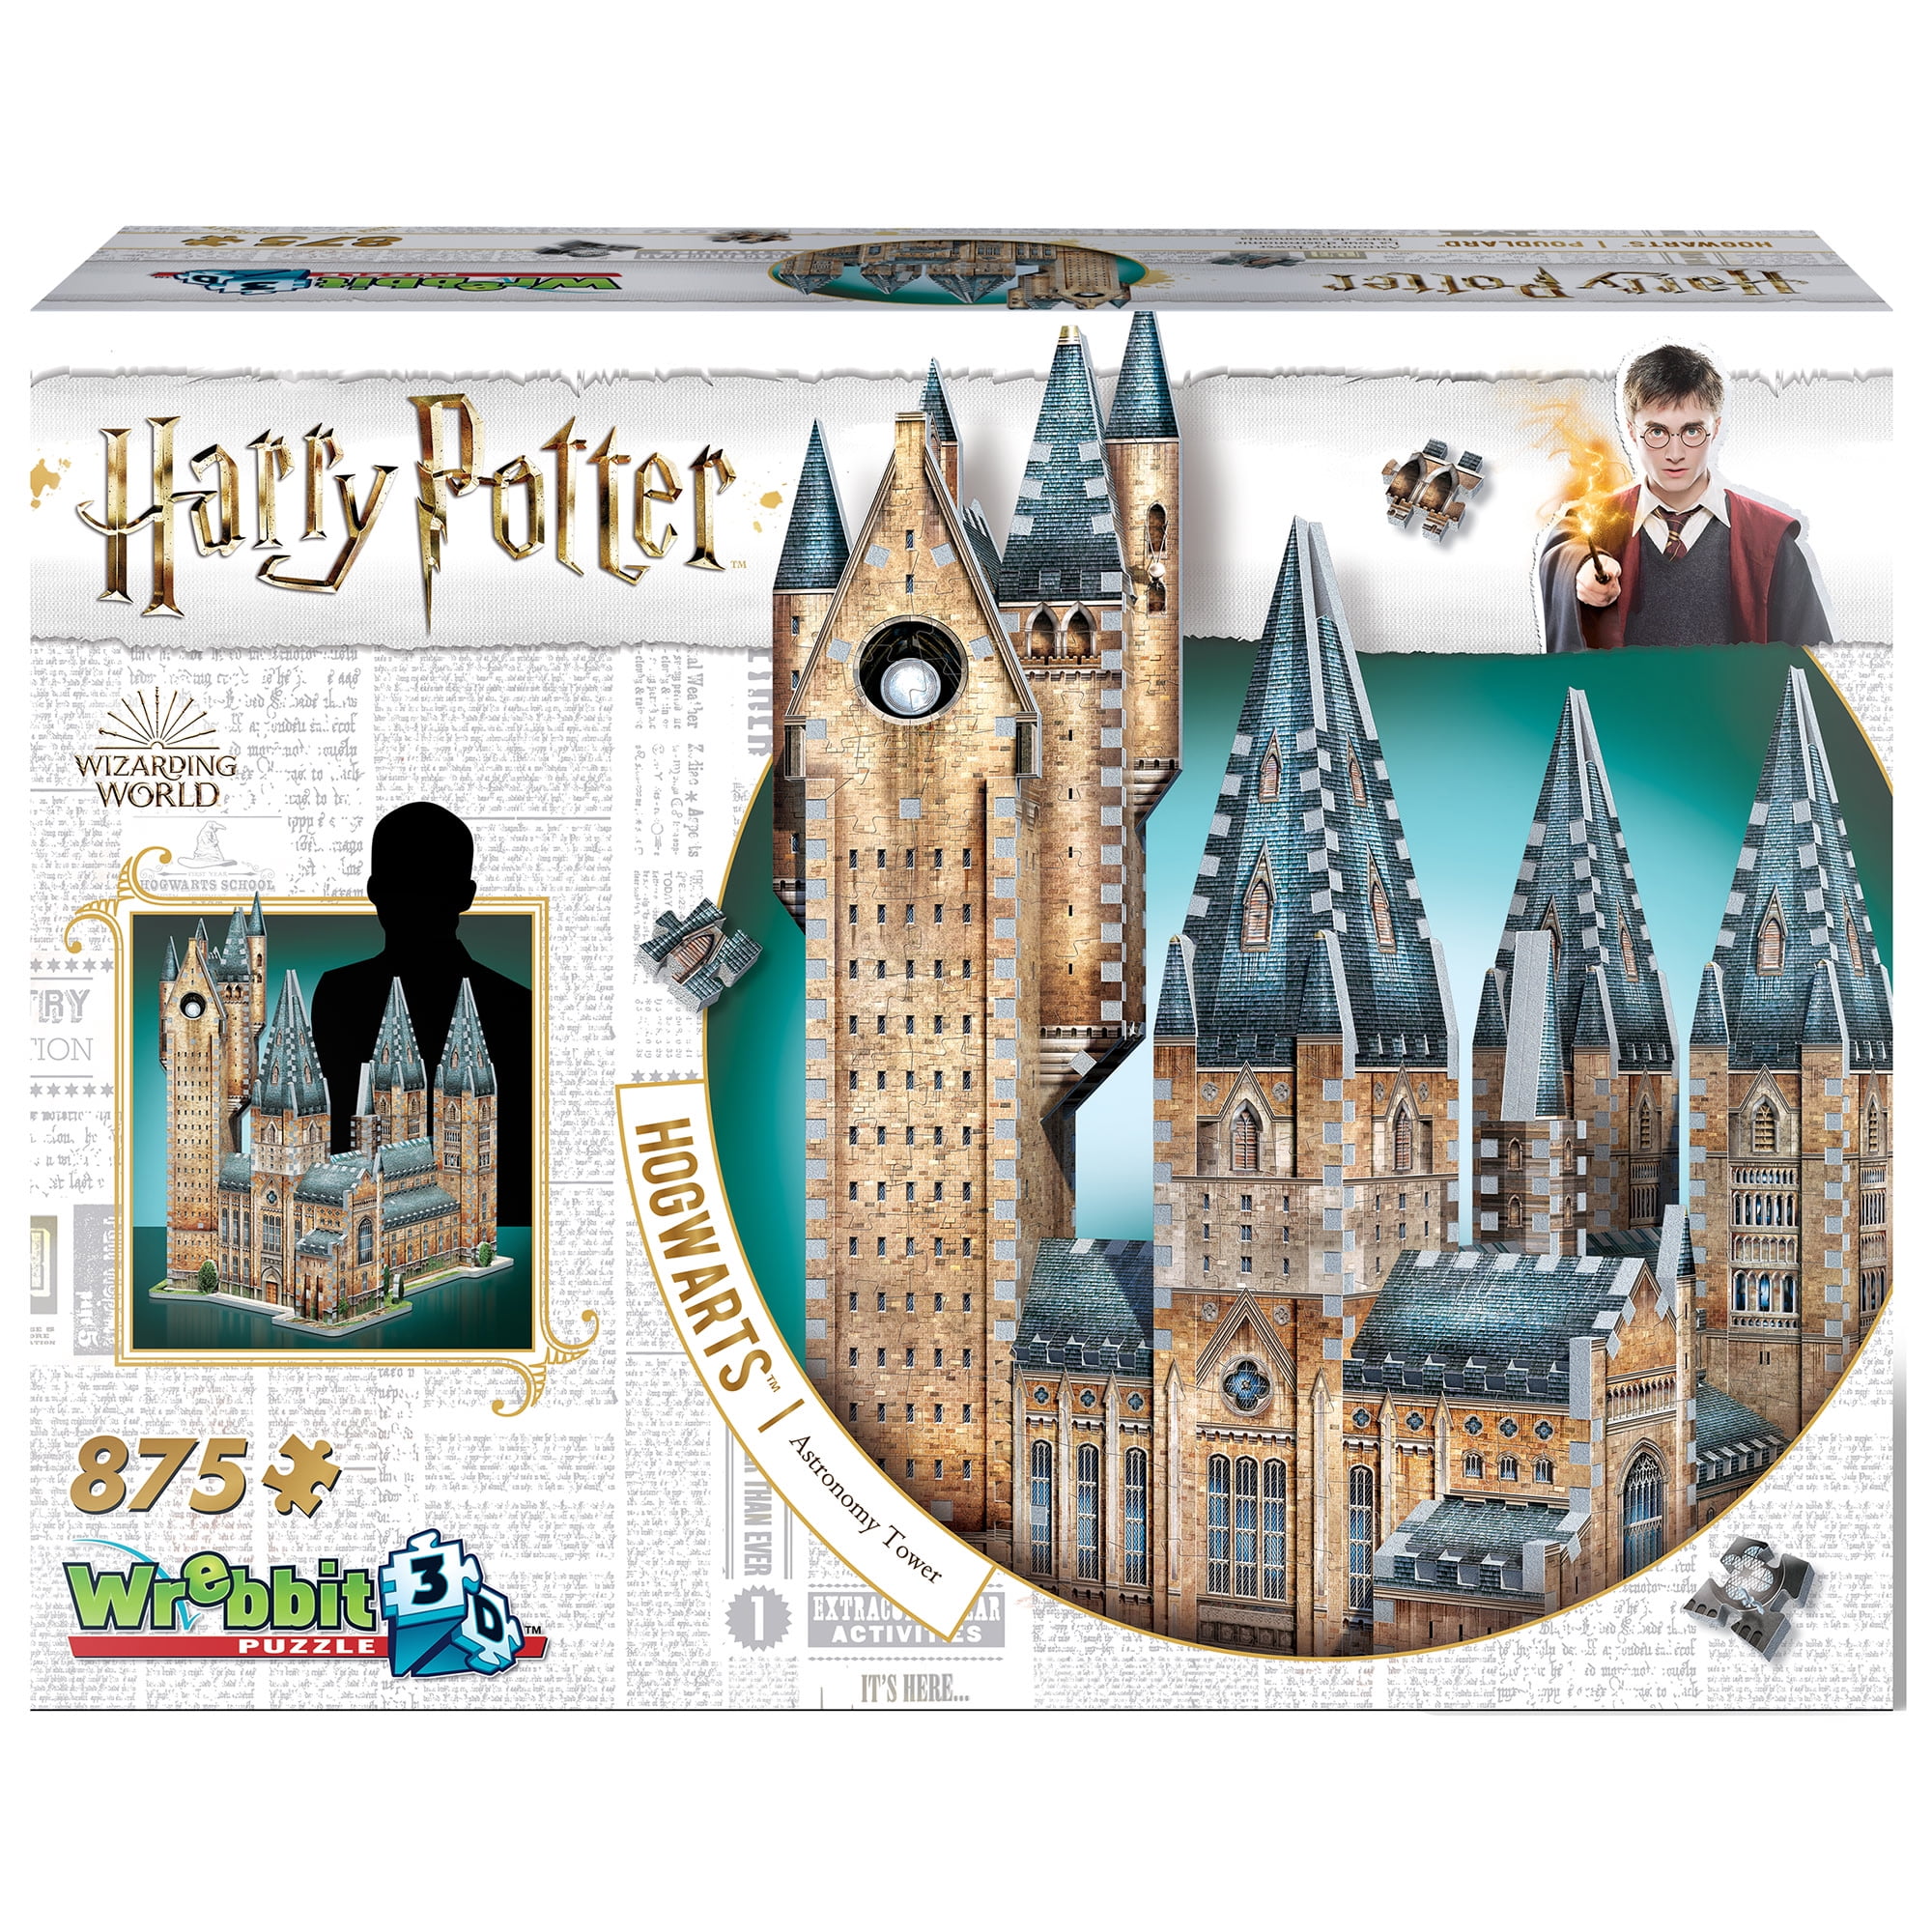 Wrebbit 3D Puzzle Harry Potter The Burrow Weasley Family Home 